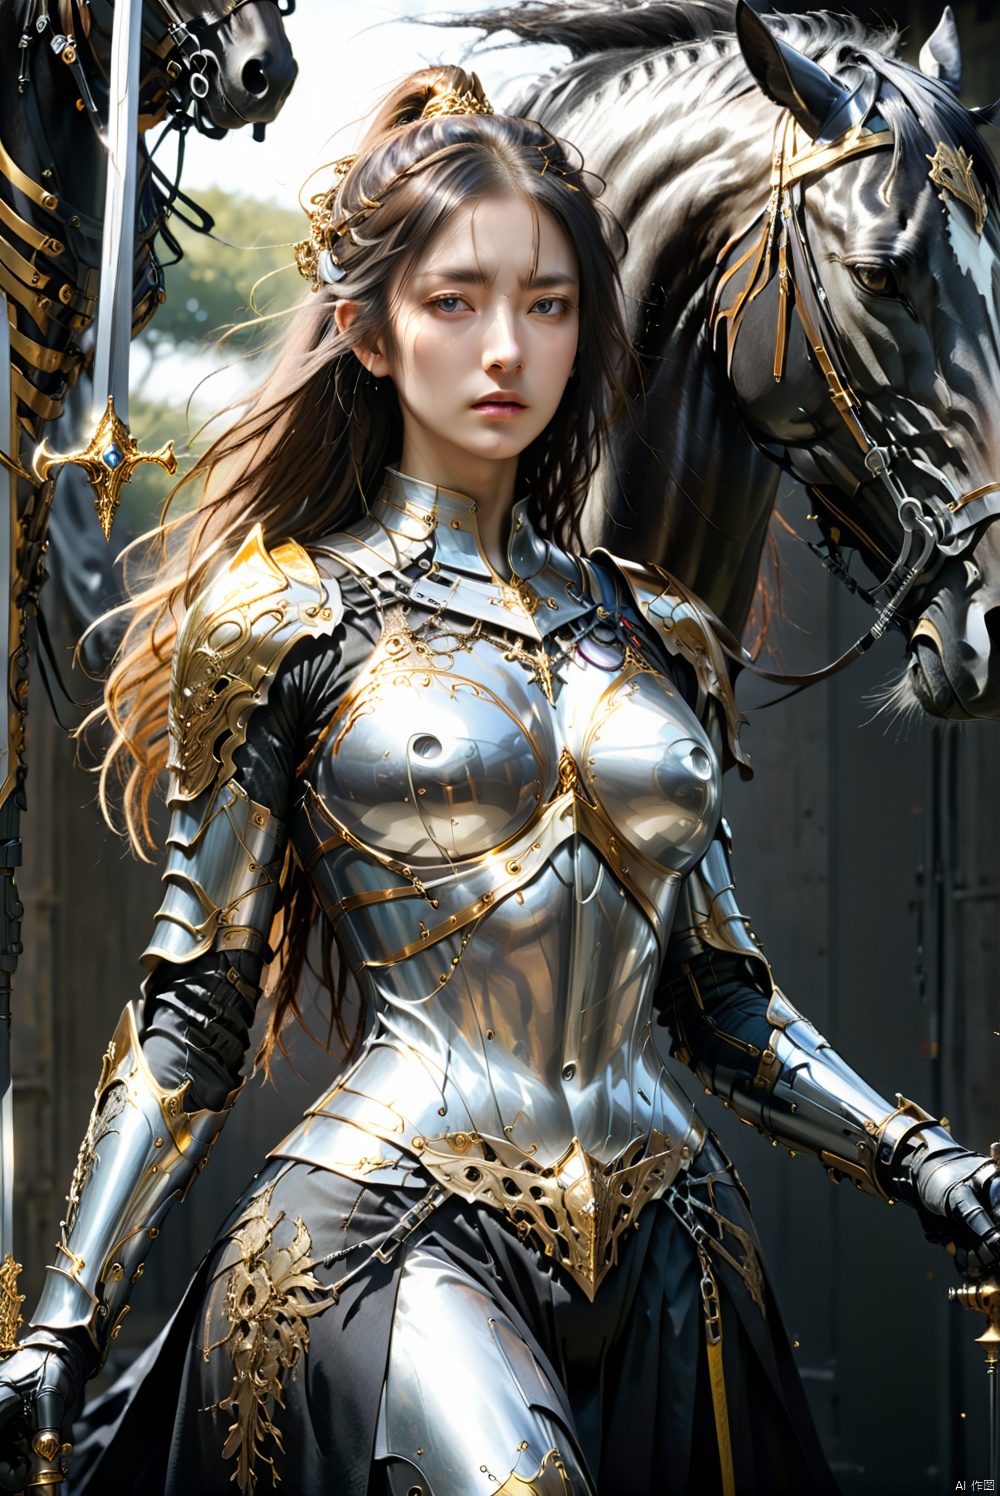  Female knight, tall figure, wearing golden armor,only exposed eyes, she held a silver sword, to the front, a tall black horse standing behind her., ananmo, ((cyborg dress and mechanic elements)), CRGF, bailing_light element, MAJICMIX STYLE